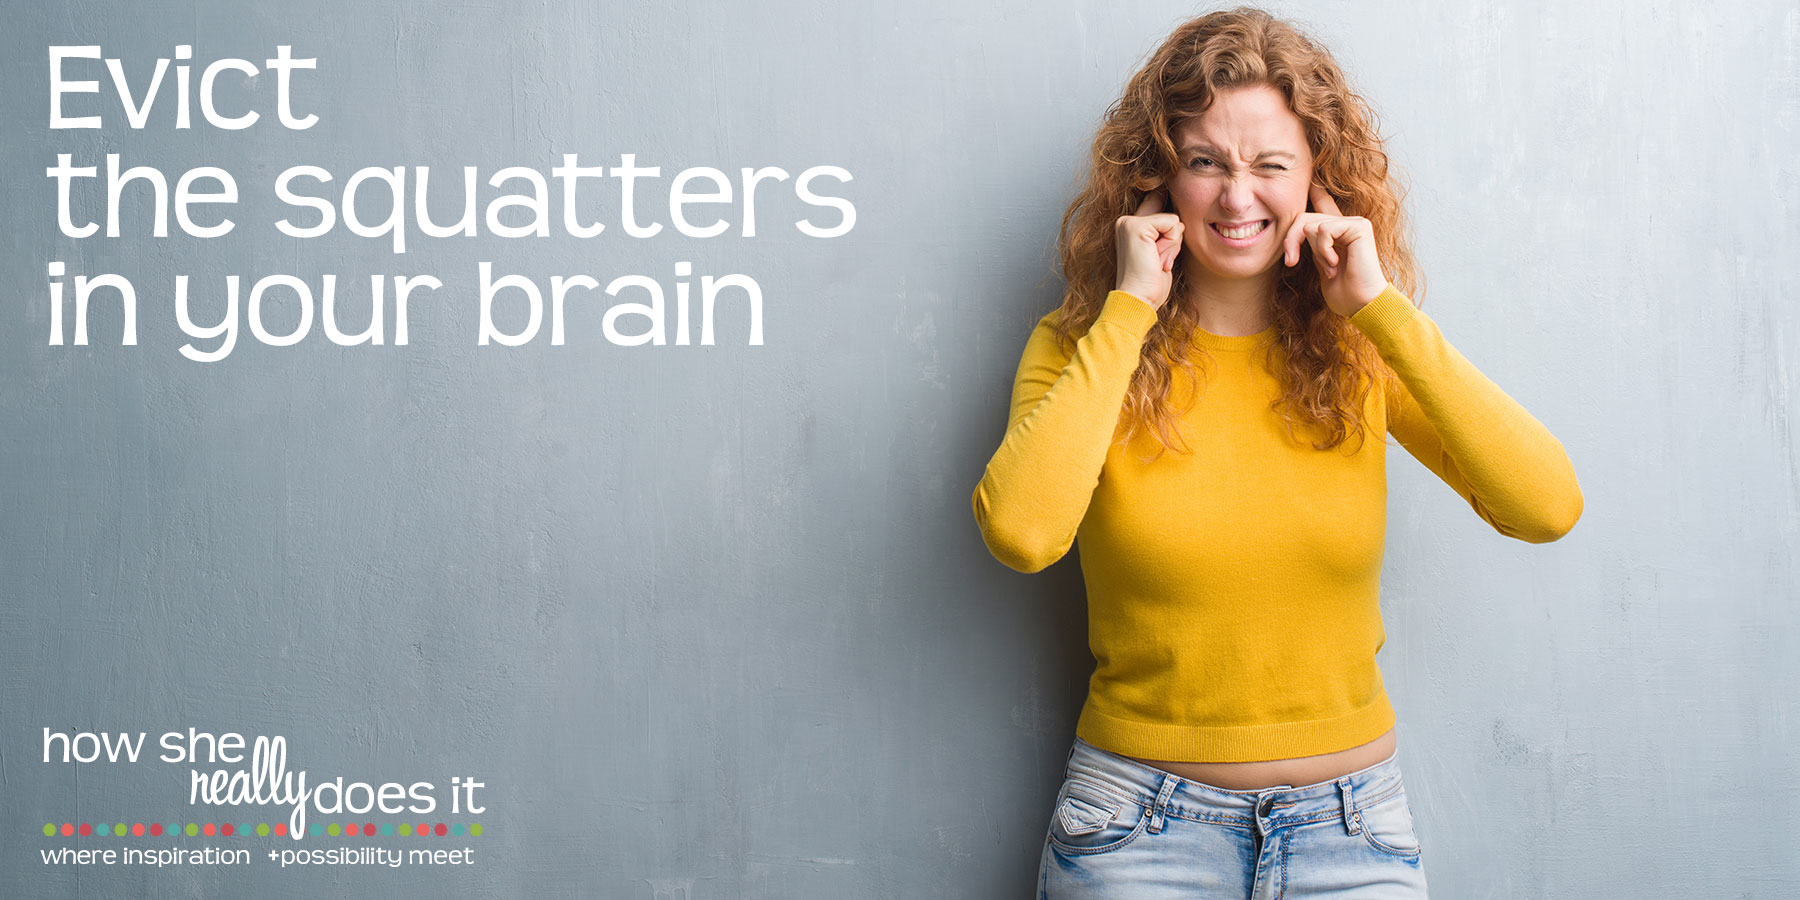 Evict the squatters in your brain